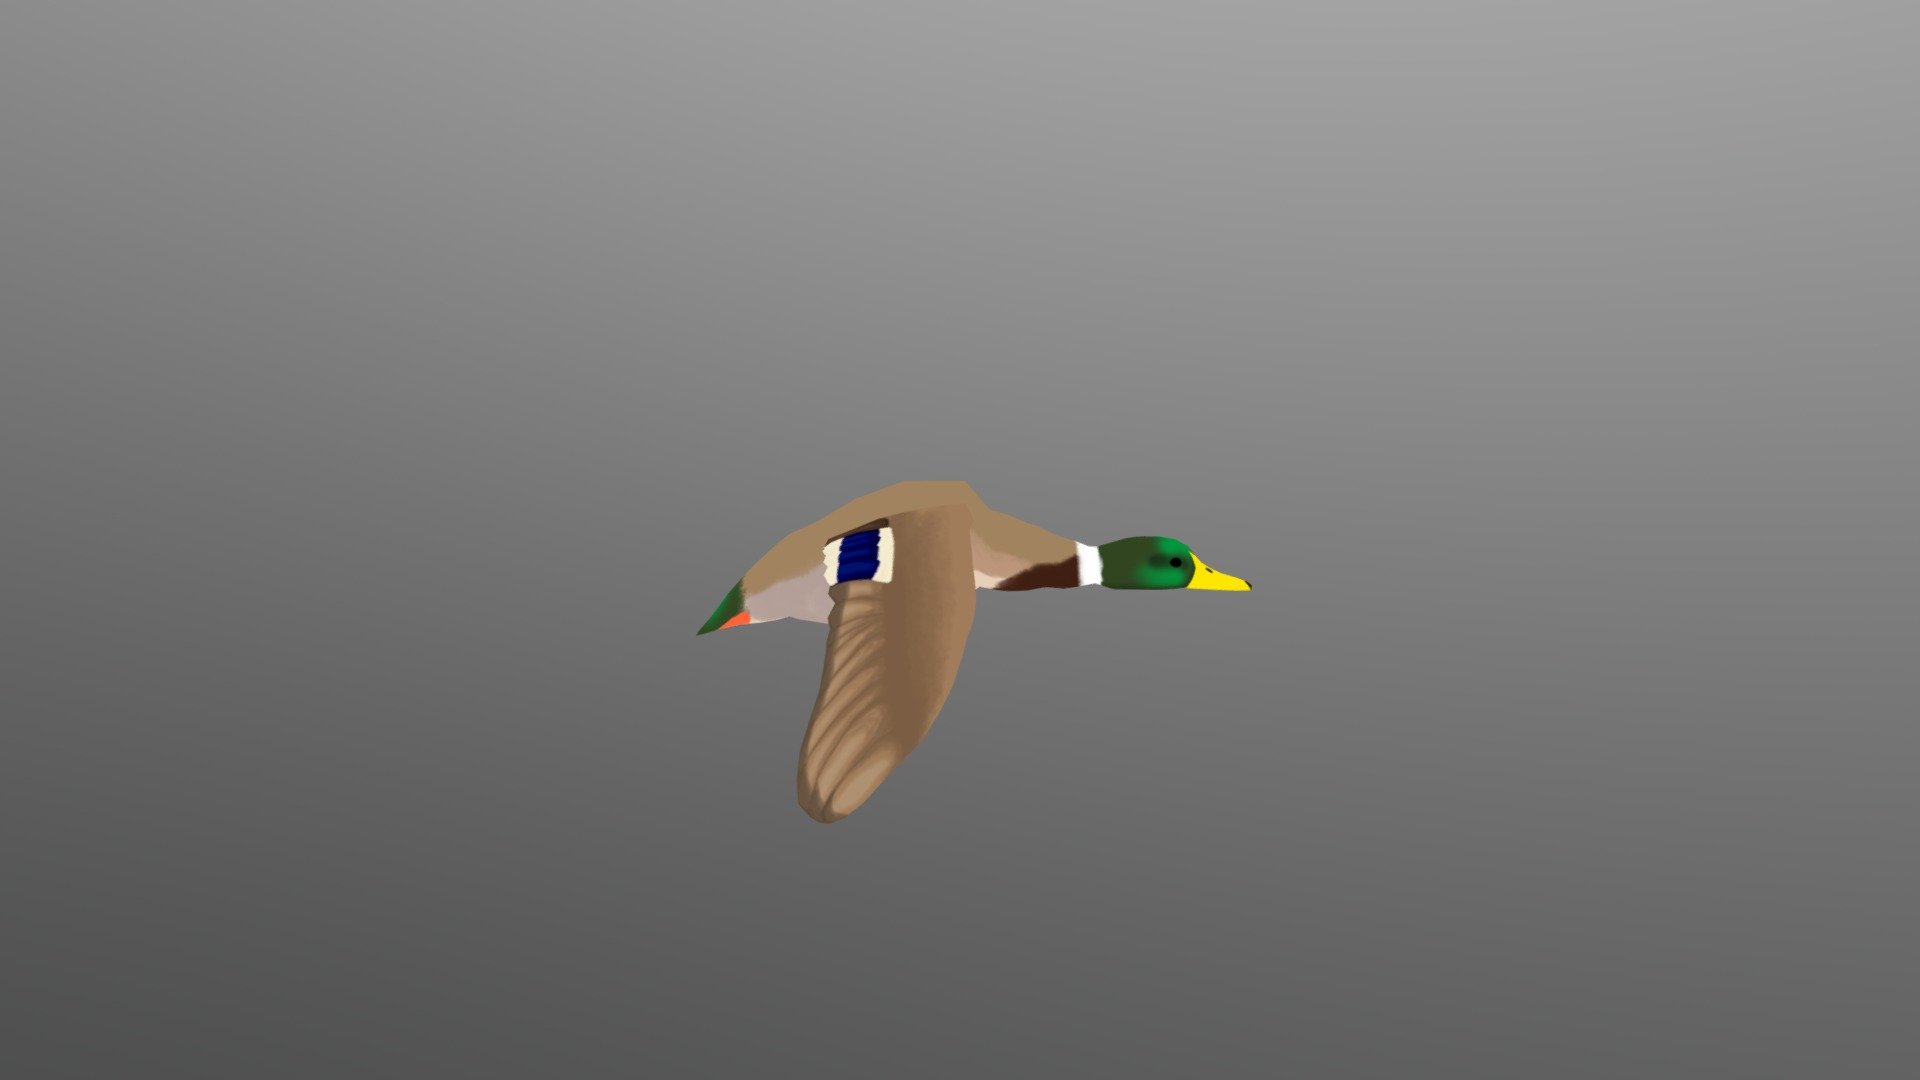 This is from a school assignment from a few years back. 

Friendly little duck flying :) - Mallard Duck - 3D model by Bunslake 3d model